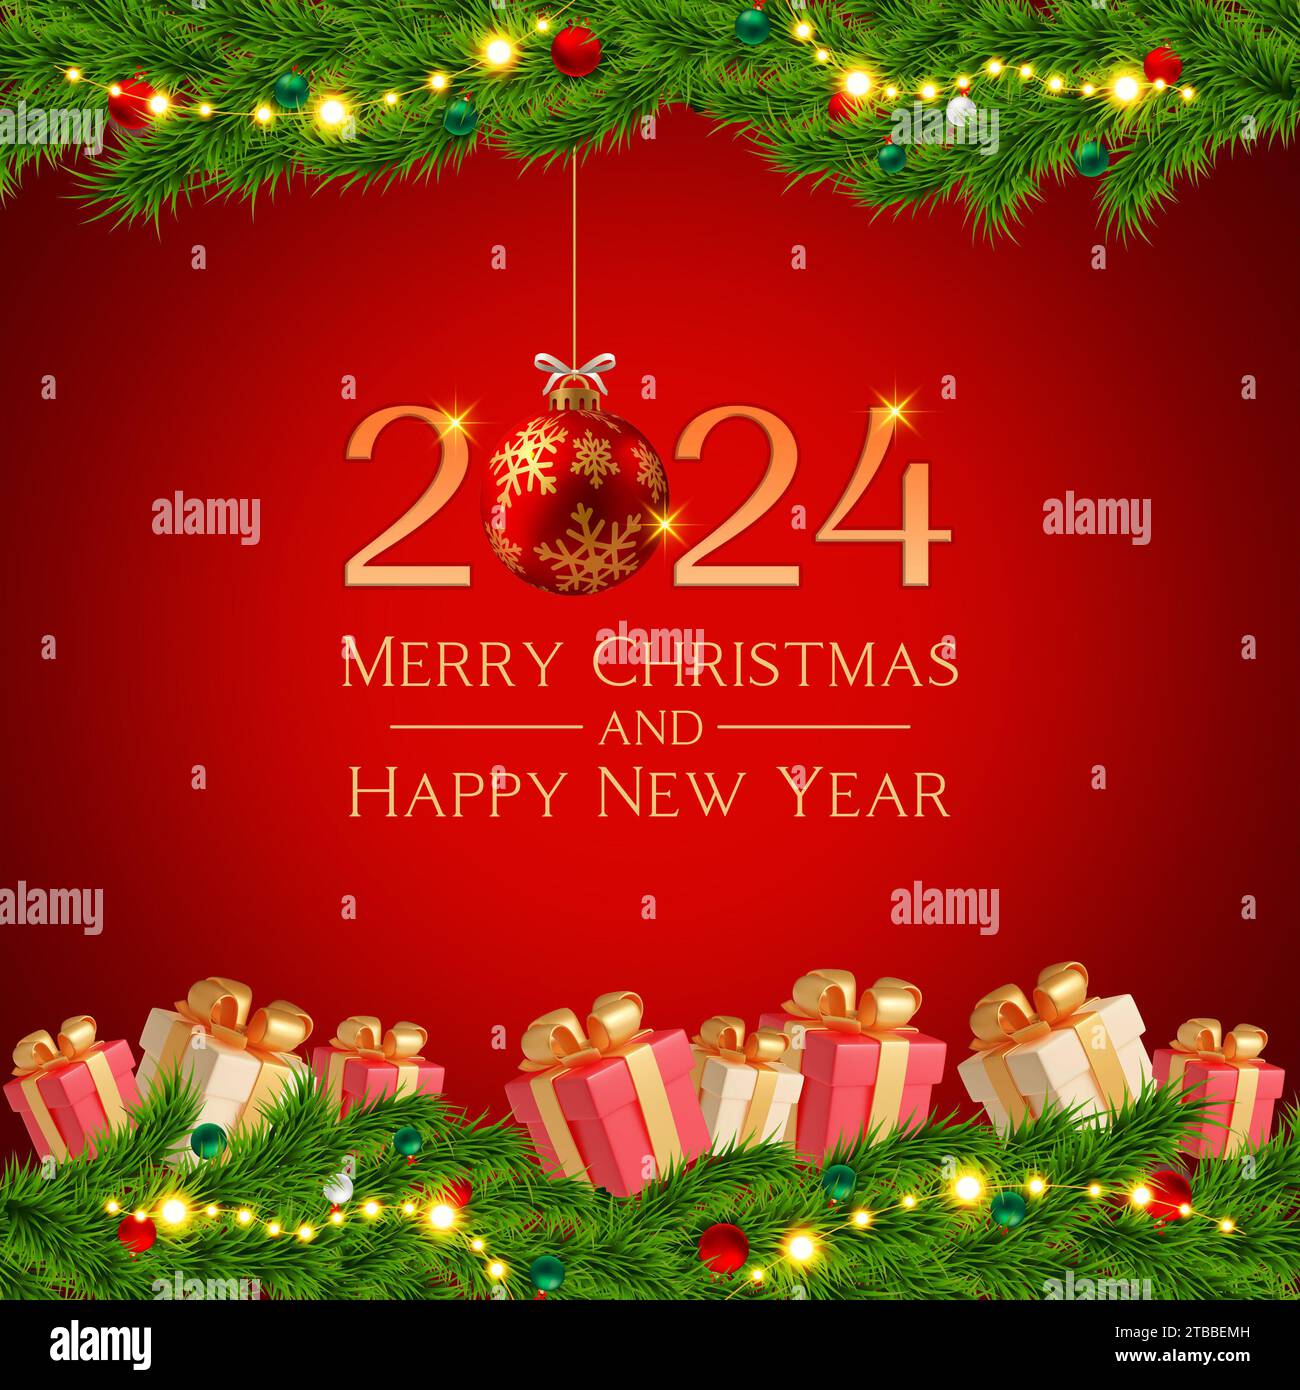 Merry Christmas & Happy New Year 2024 with fir branches and decoration ornaments elements on red background. #happynewyear #merrychristmas # 2024 Stock Photo